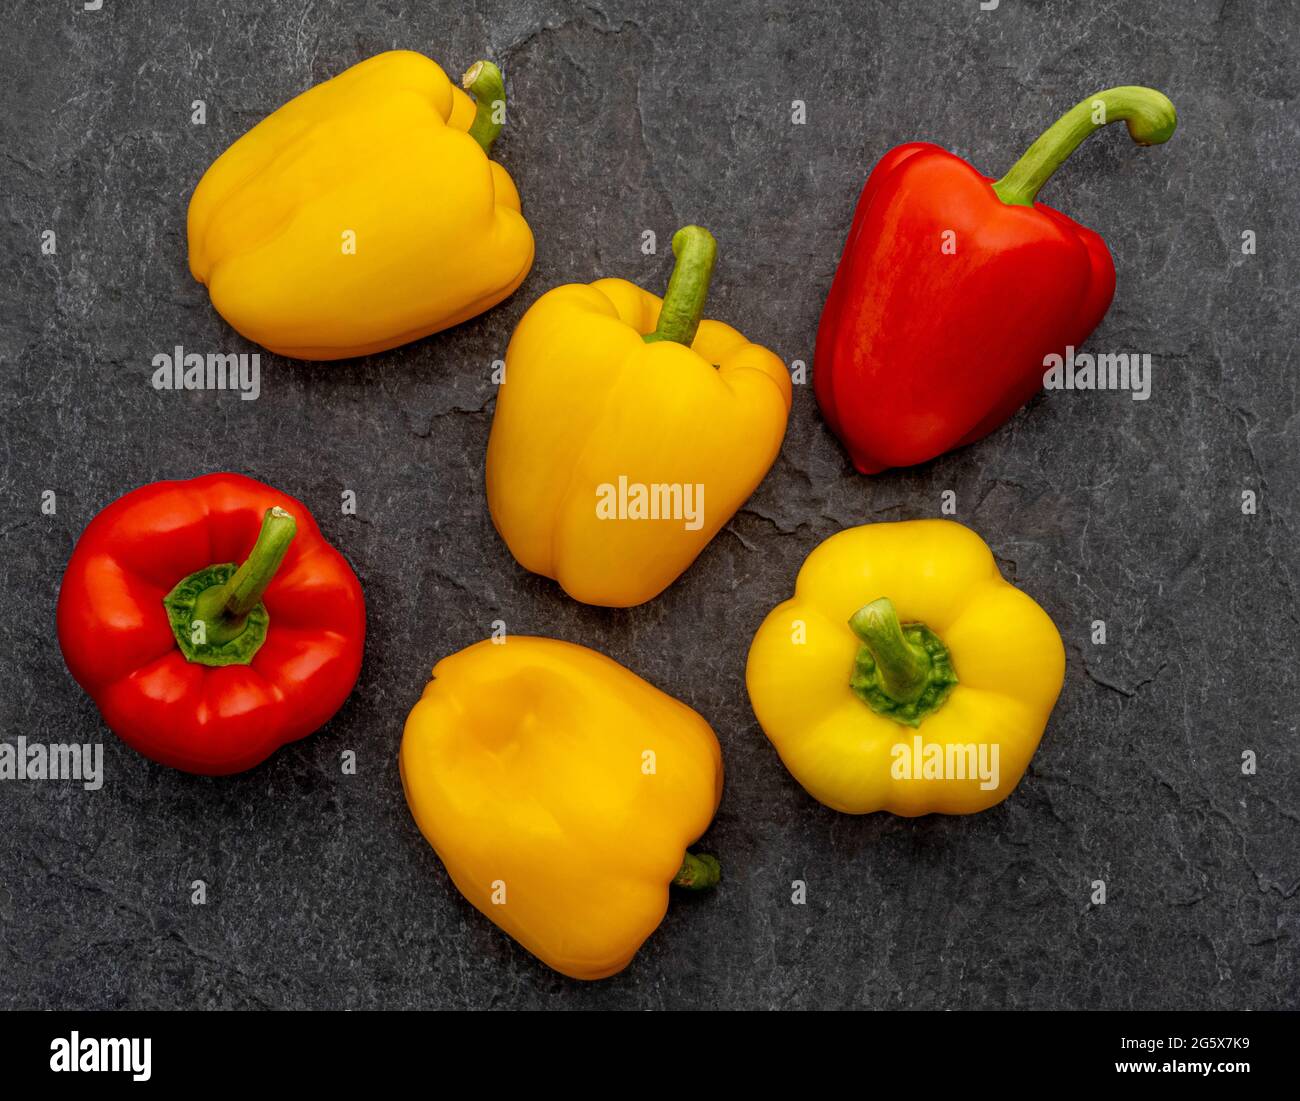 Plan view of red and yellow bell peppers on a grey textured background. Stock Photo